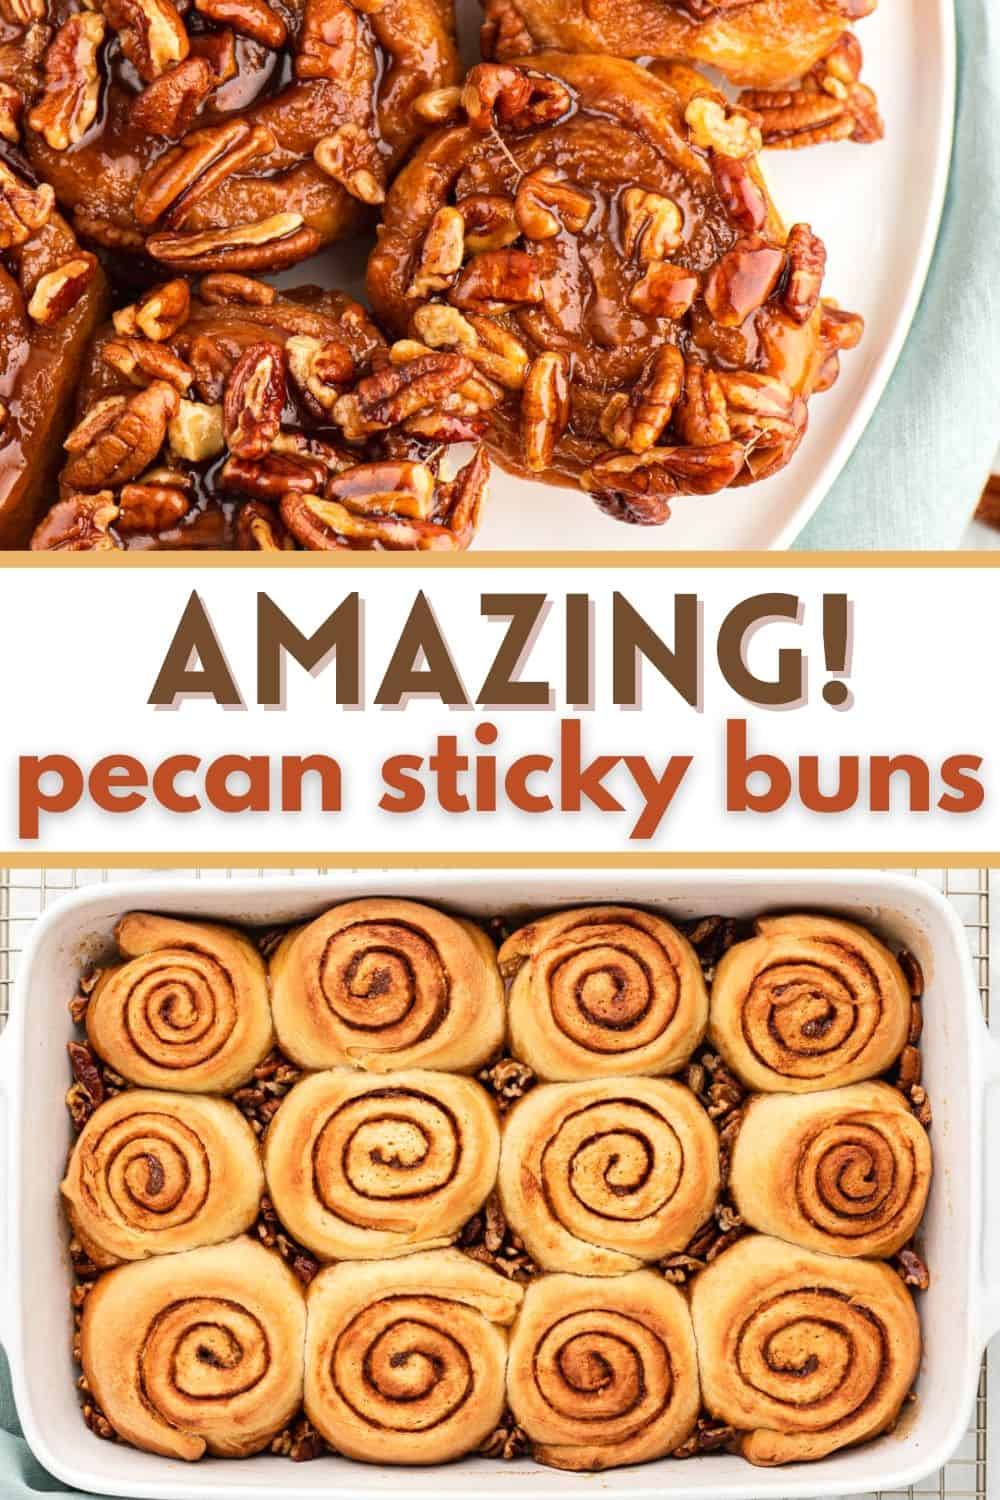 Pecan sticky buns are our favorite gooey cinnamon rolls for weekend and holiday brunch. These sticky rolls start with an easy homemade dough and baked with a delicious caramel pecan topping.